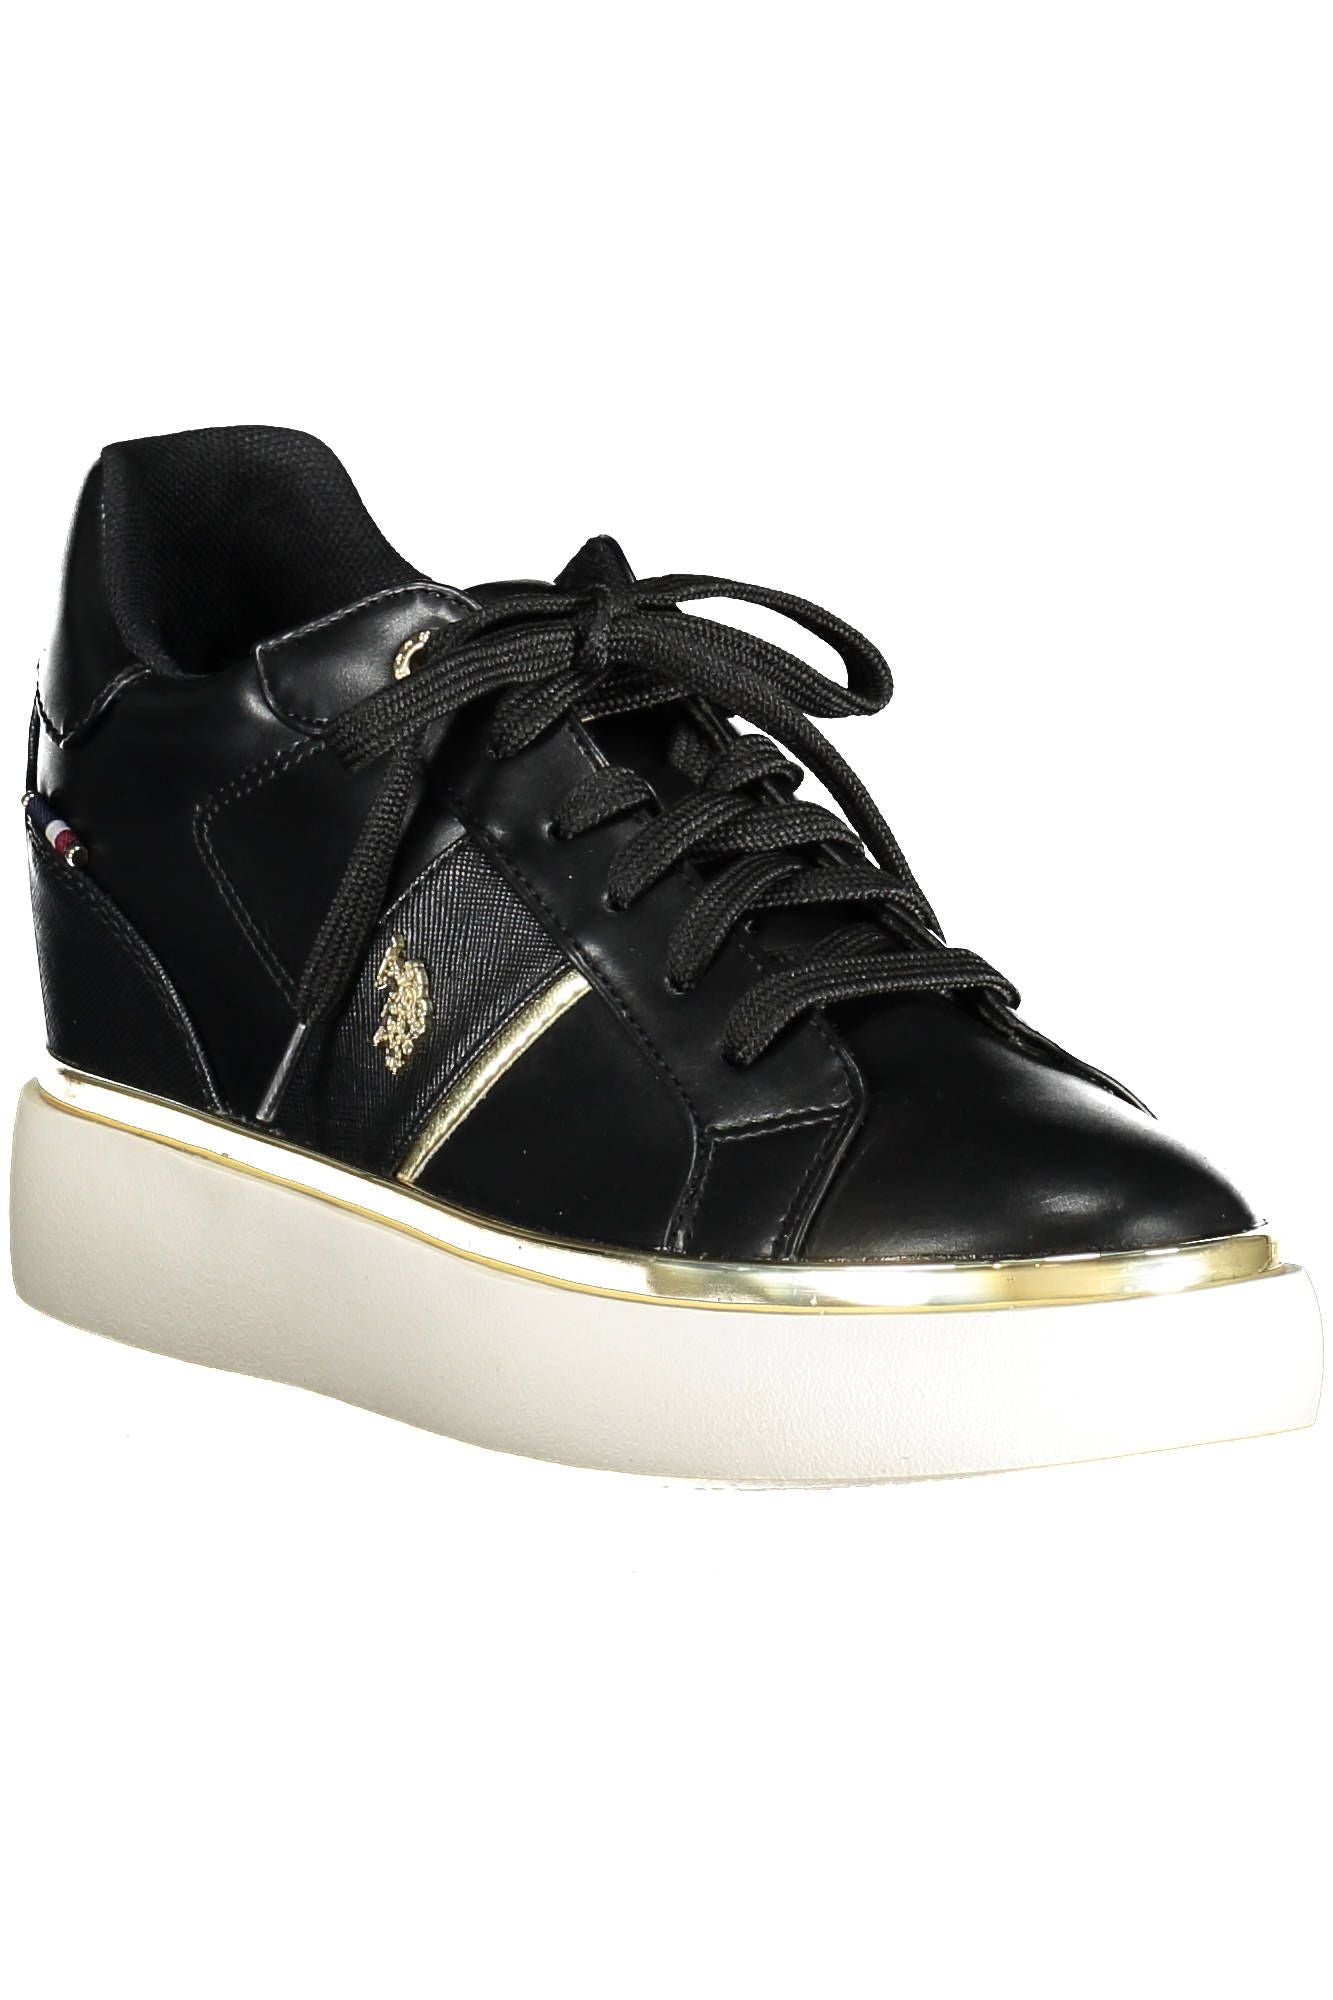 Chic Black Lace-Up Sneakers with Logo Detailing